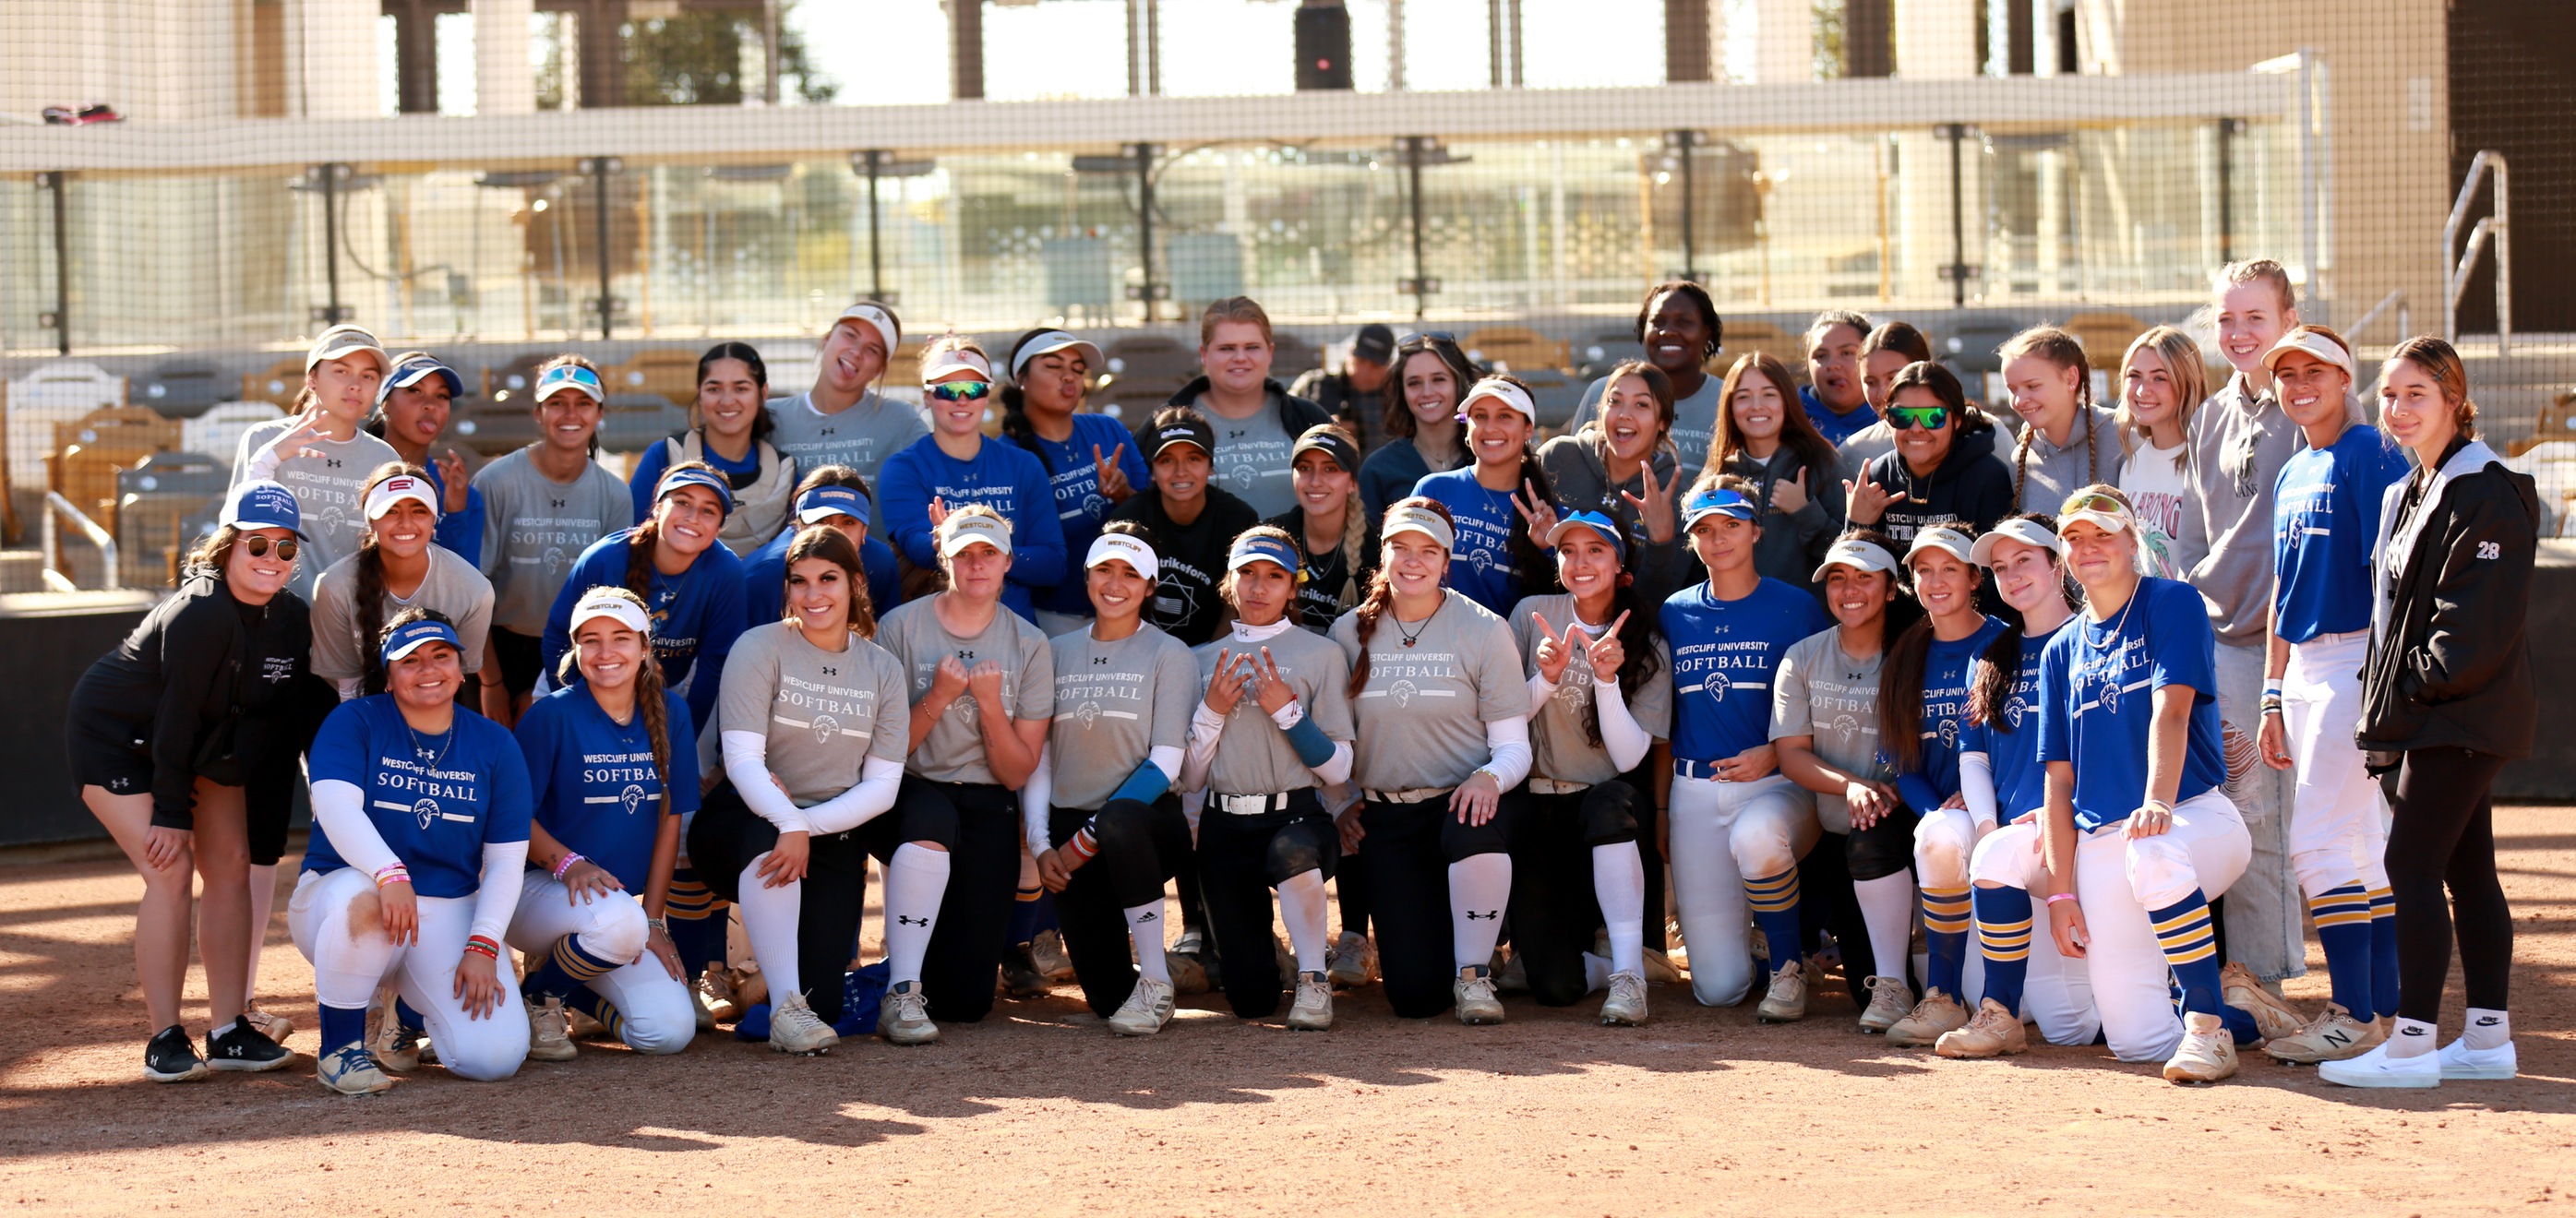 Westcliff Softball is poised to compete for a Cal Pac championship in 2023.